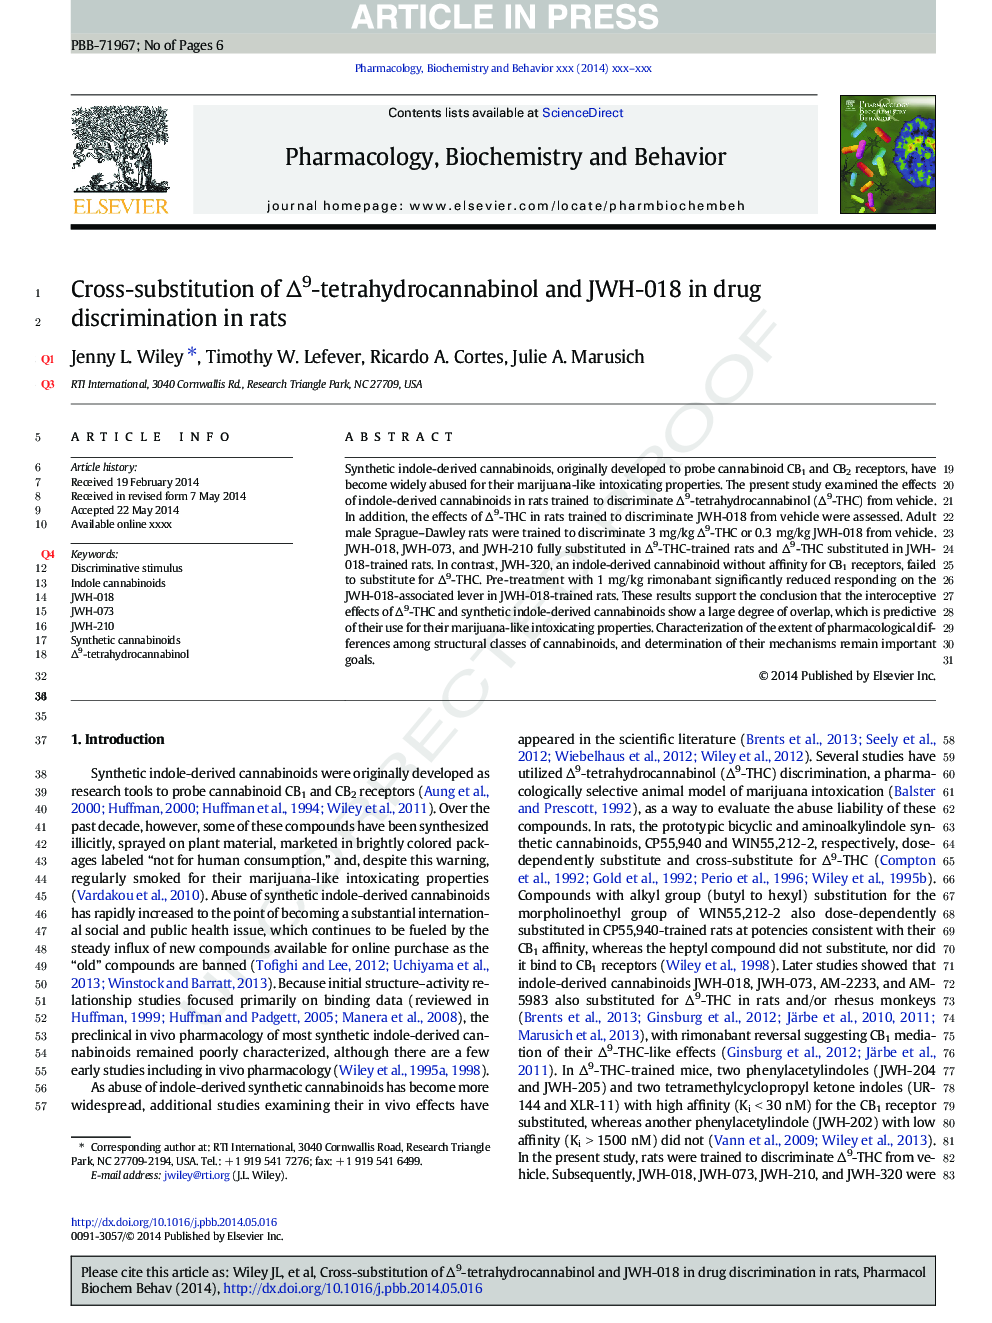 Cross-substitution of Î9-tetrahydrocannabinol and JWH-018 in drug discrimination in rats